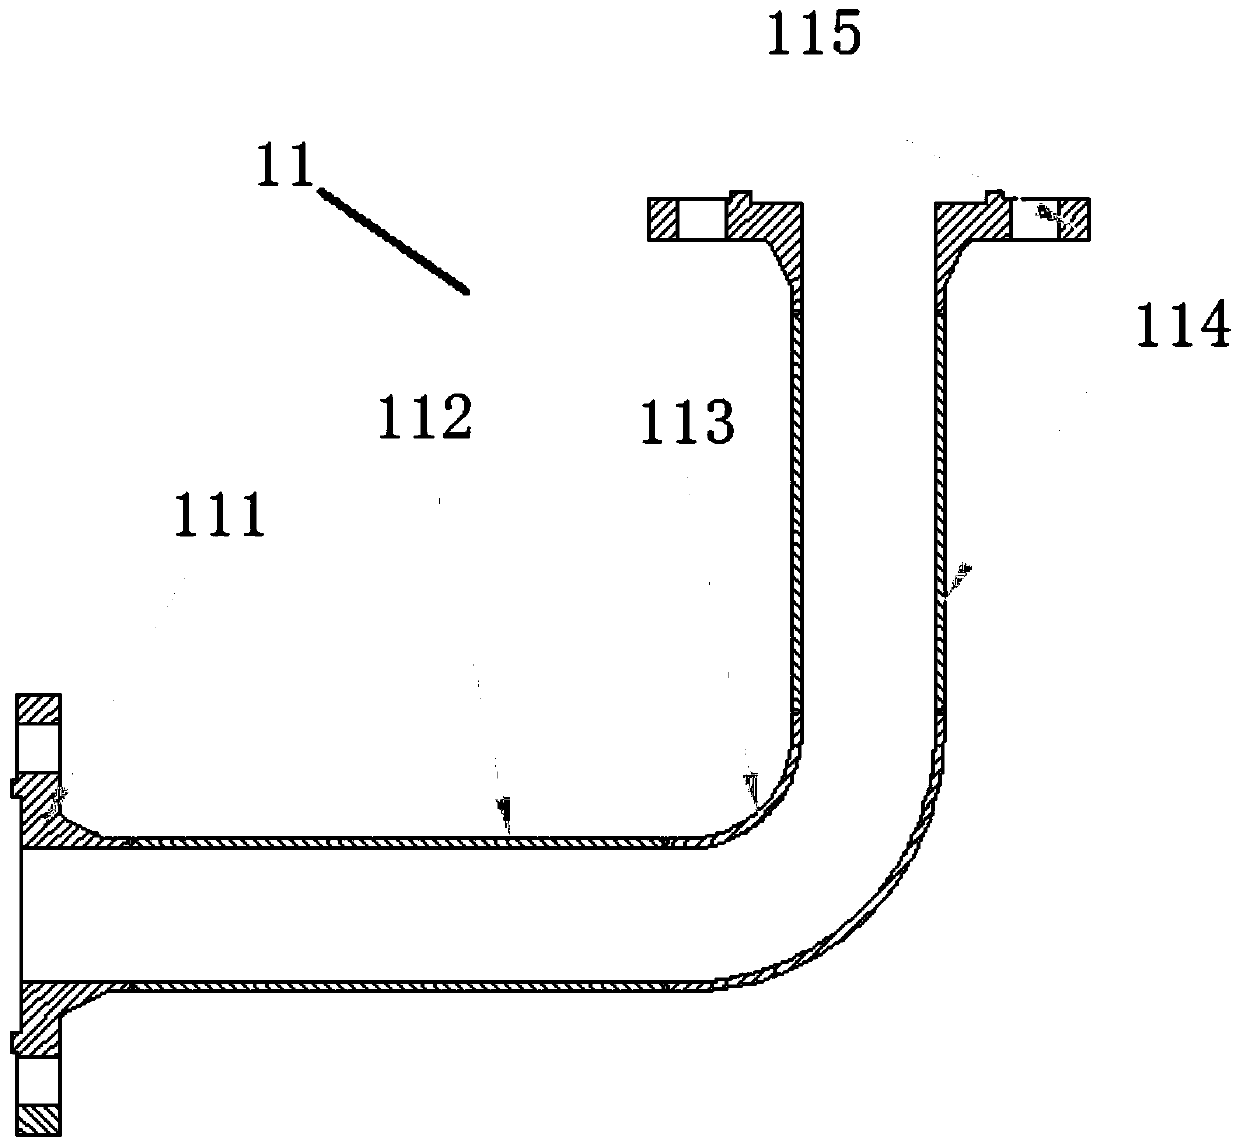 High-power thick rod fuel element simulation device